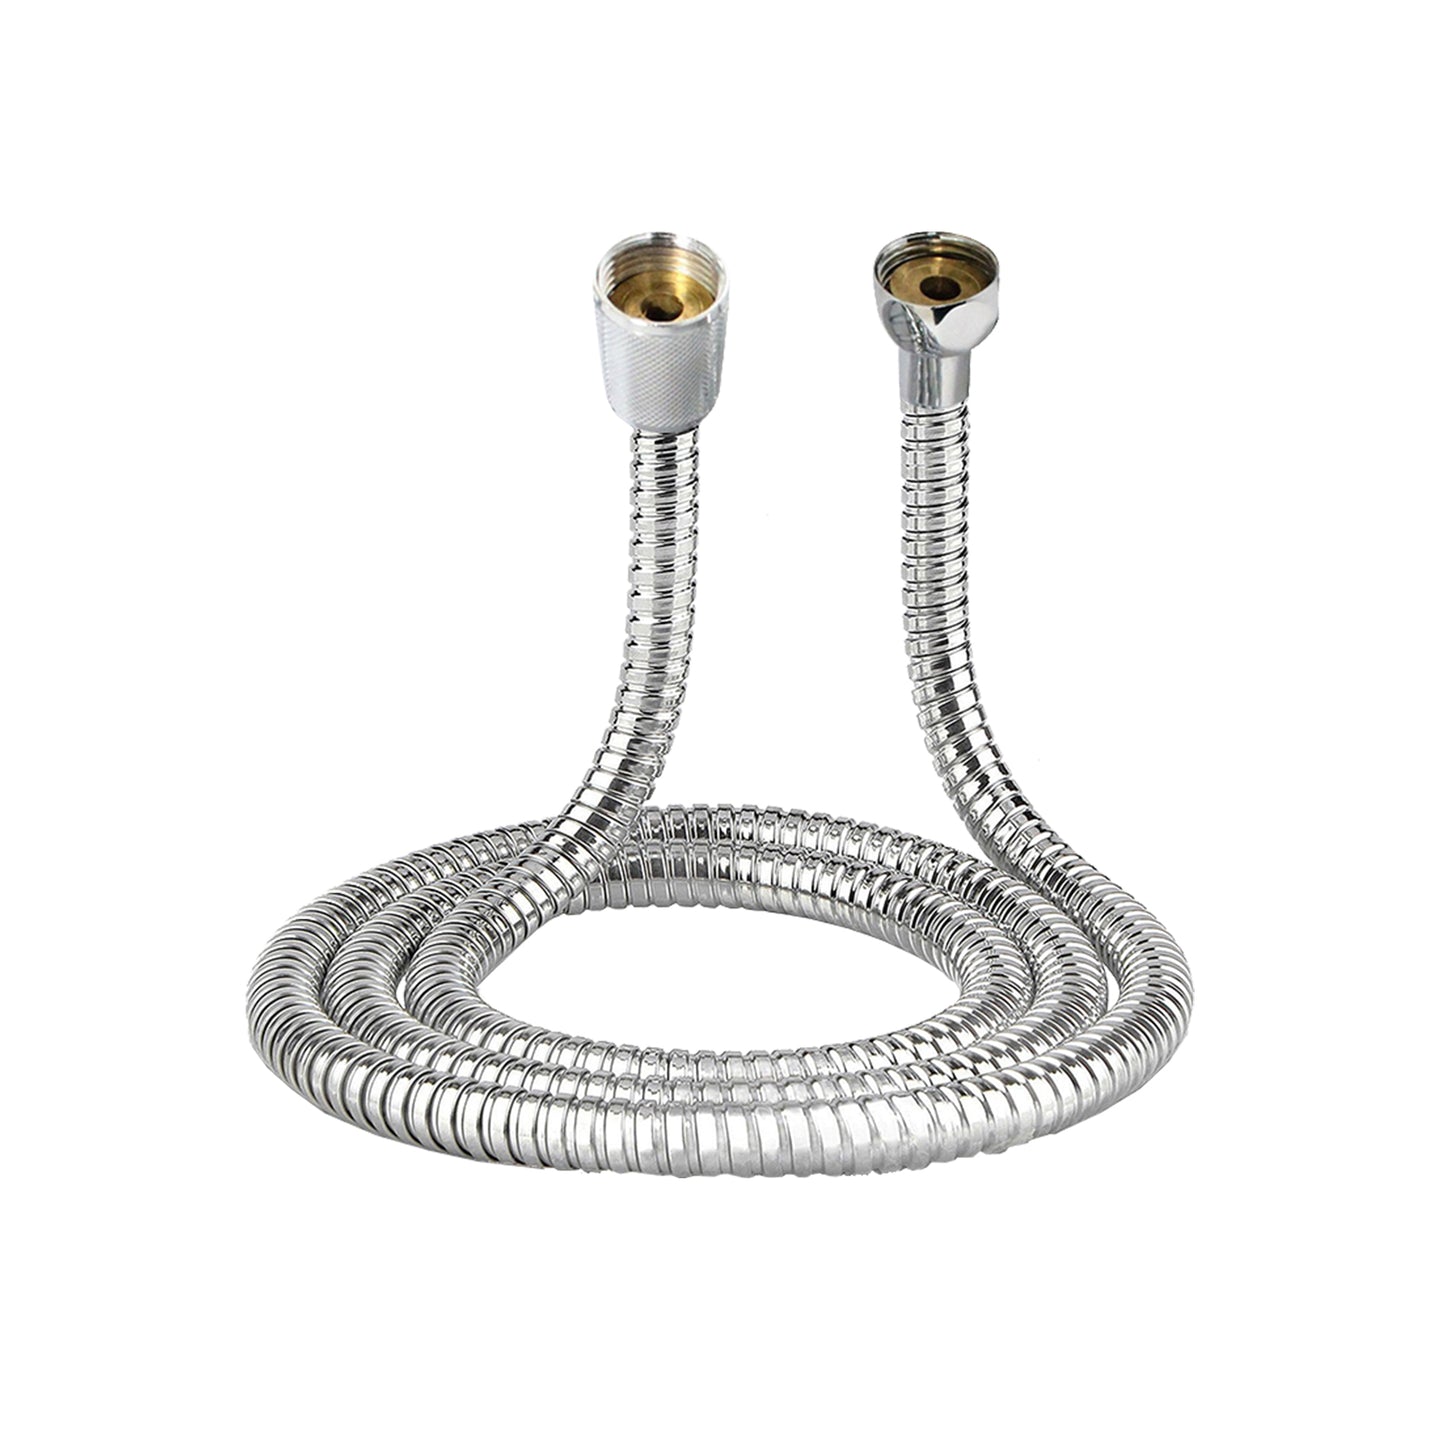 1.5m-Stainless-Steel-Non-Kink-Shower-Hose-Connections